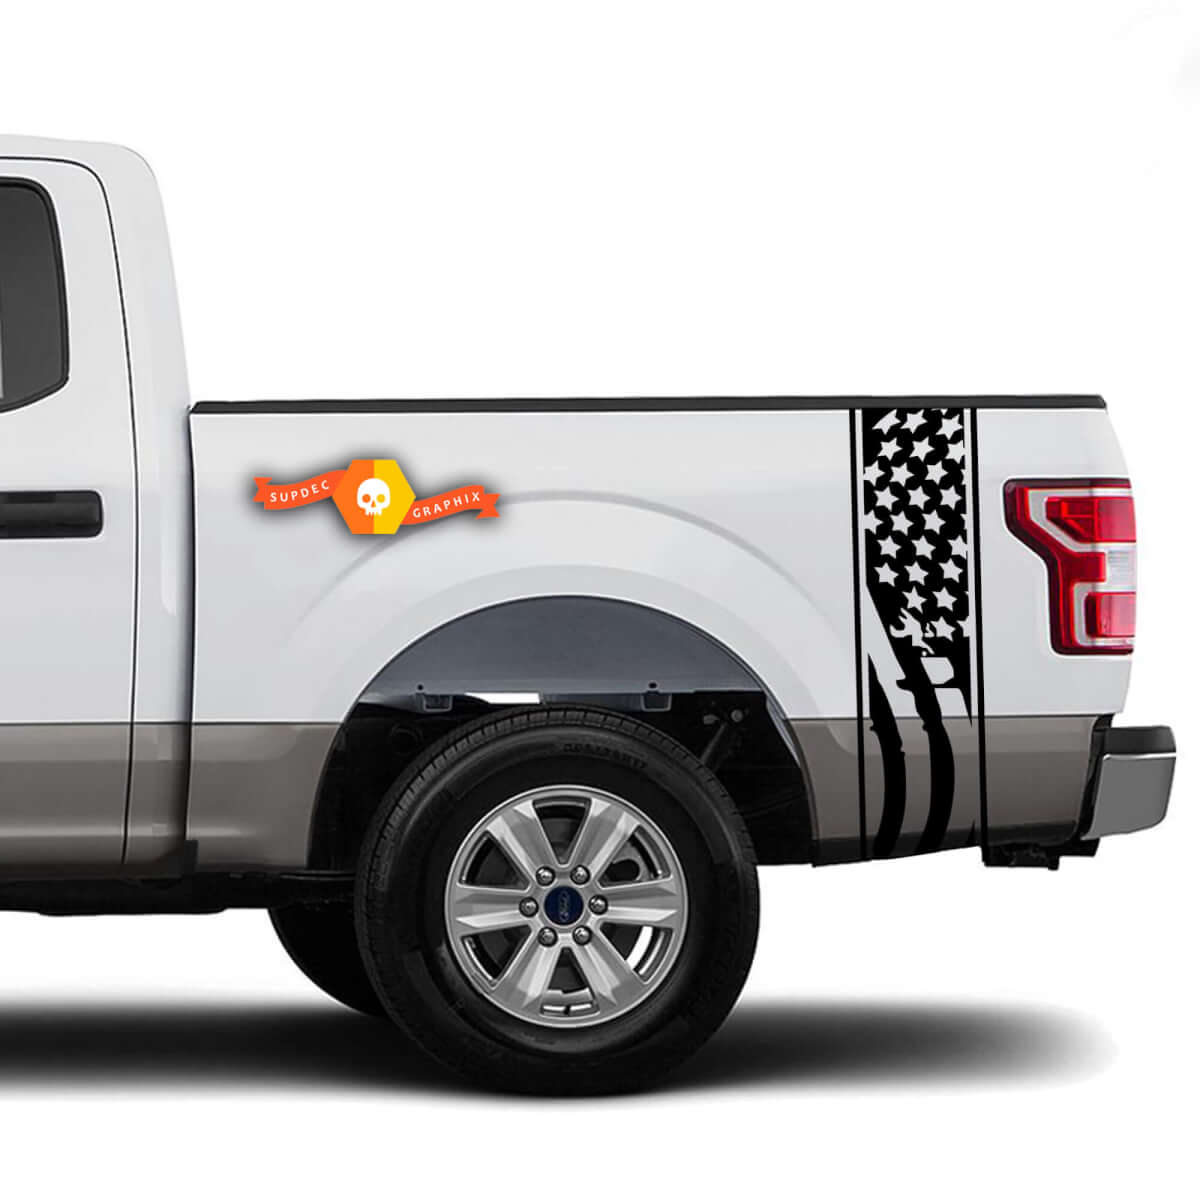 Waving USA flag racer Bed Side Stripes Truck decals - Fits Ram Chevy Ford Jeep Gladiator